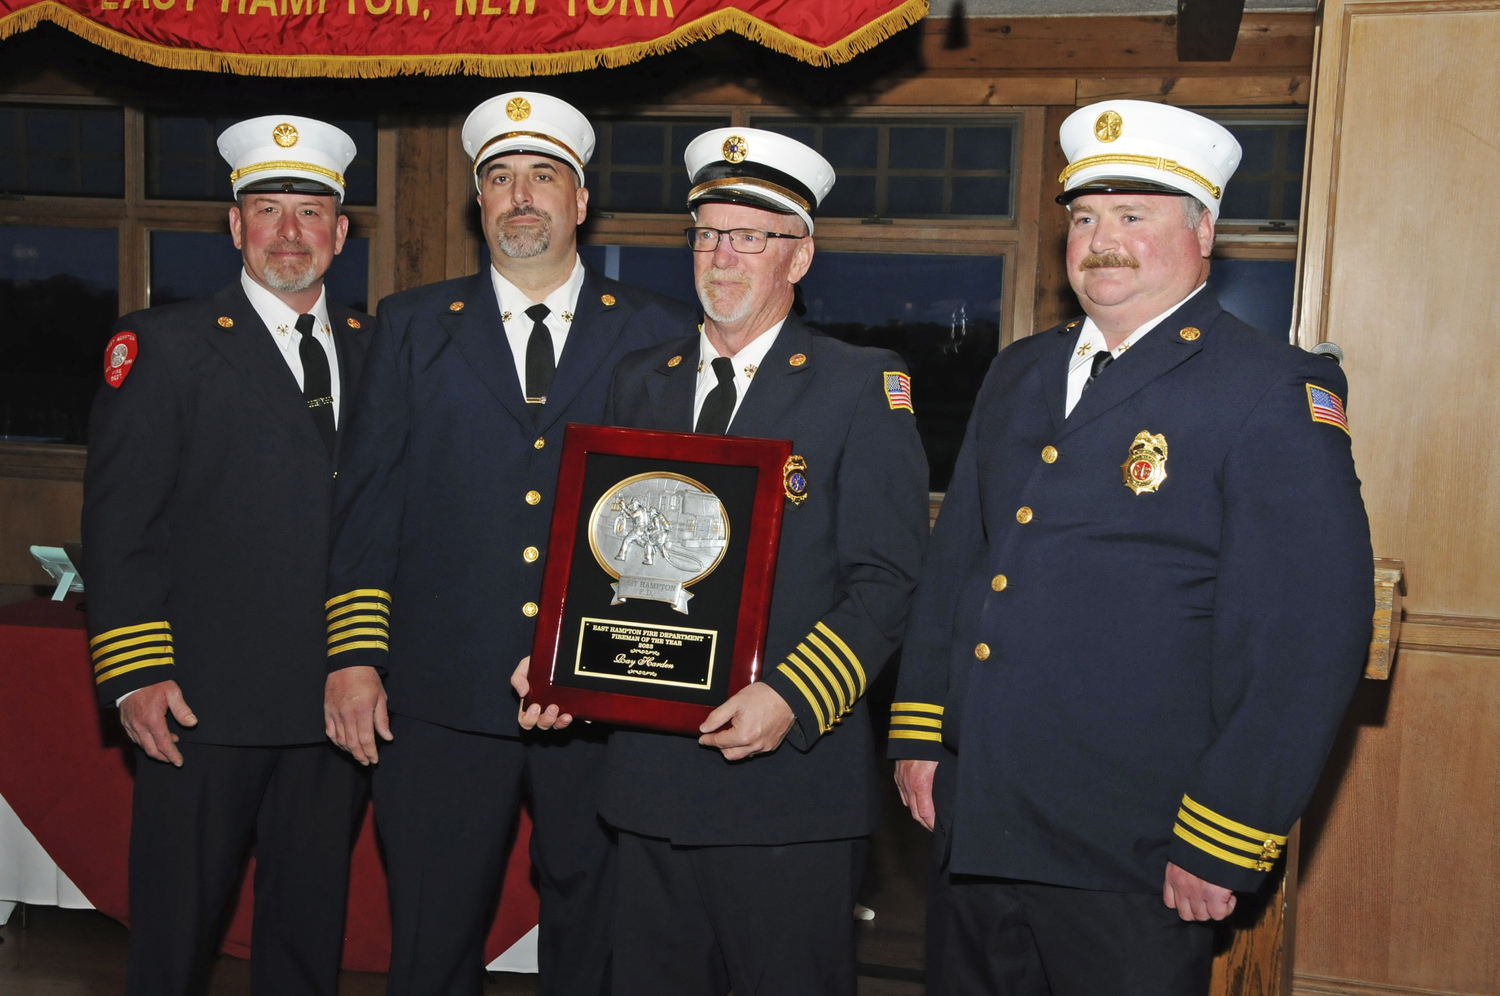 Ray Harden, Company No. 2 Secretary/Treasurer, with the Fireman of the Year 2023 award at the East Hampton Fire Department's 125th Annual Inspection Dinner at the Maidstone Club on Saturday.  RICHARD LEWIN